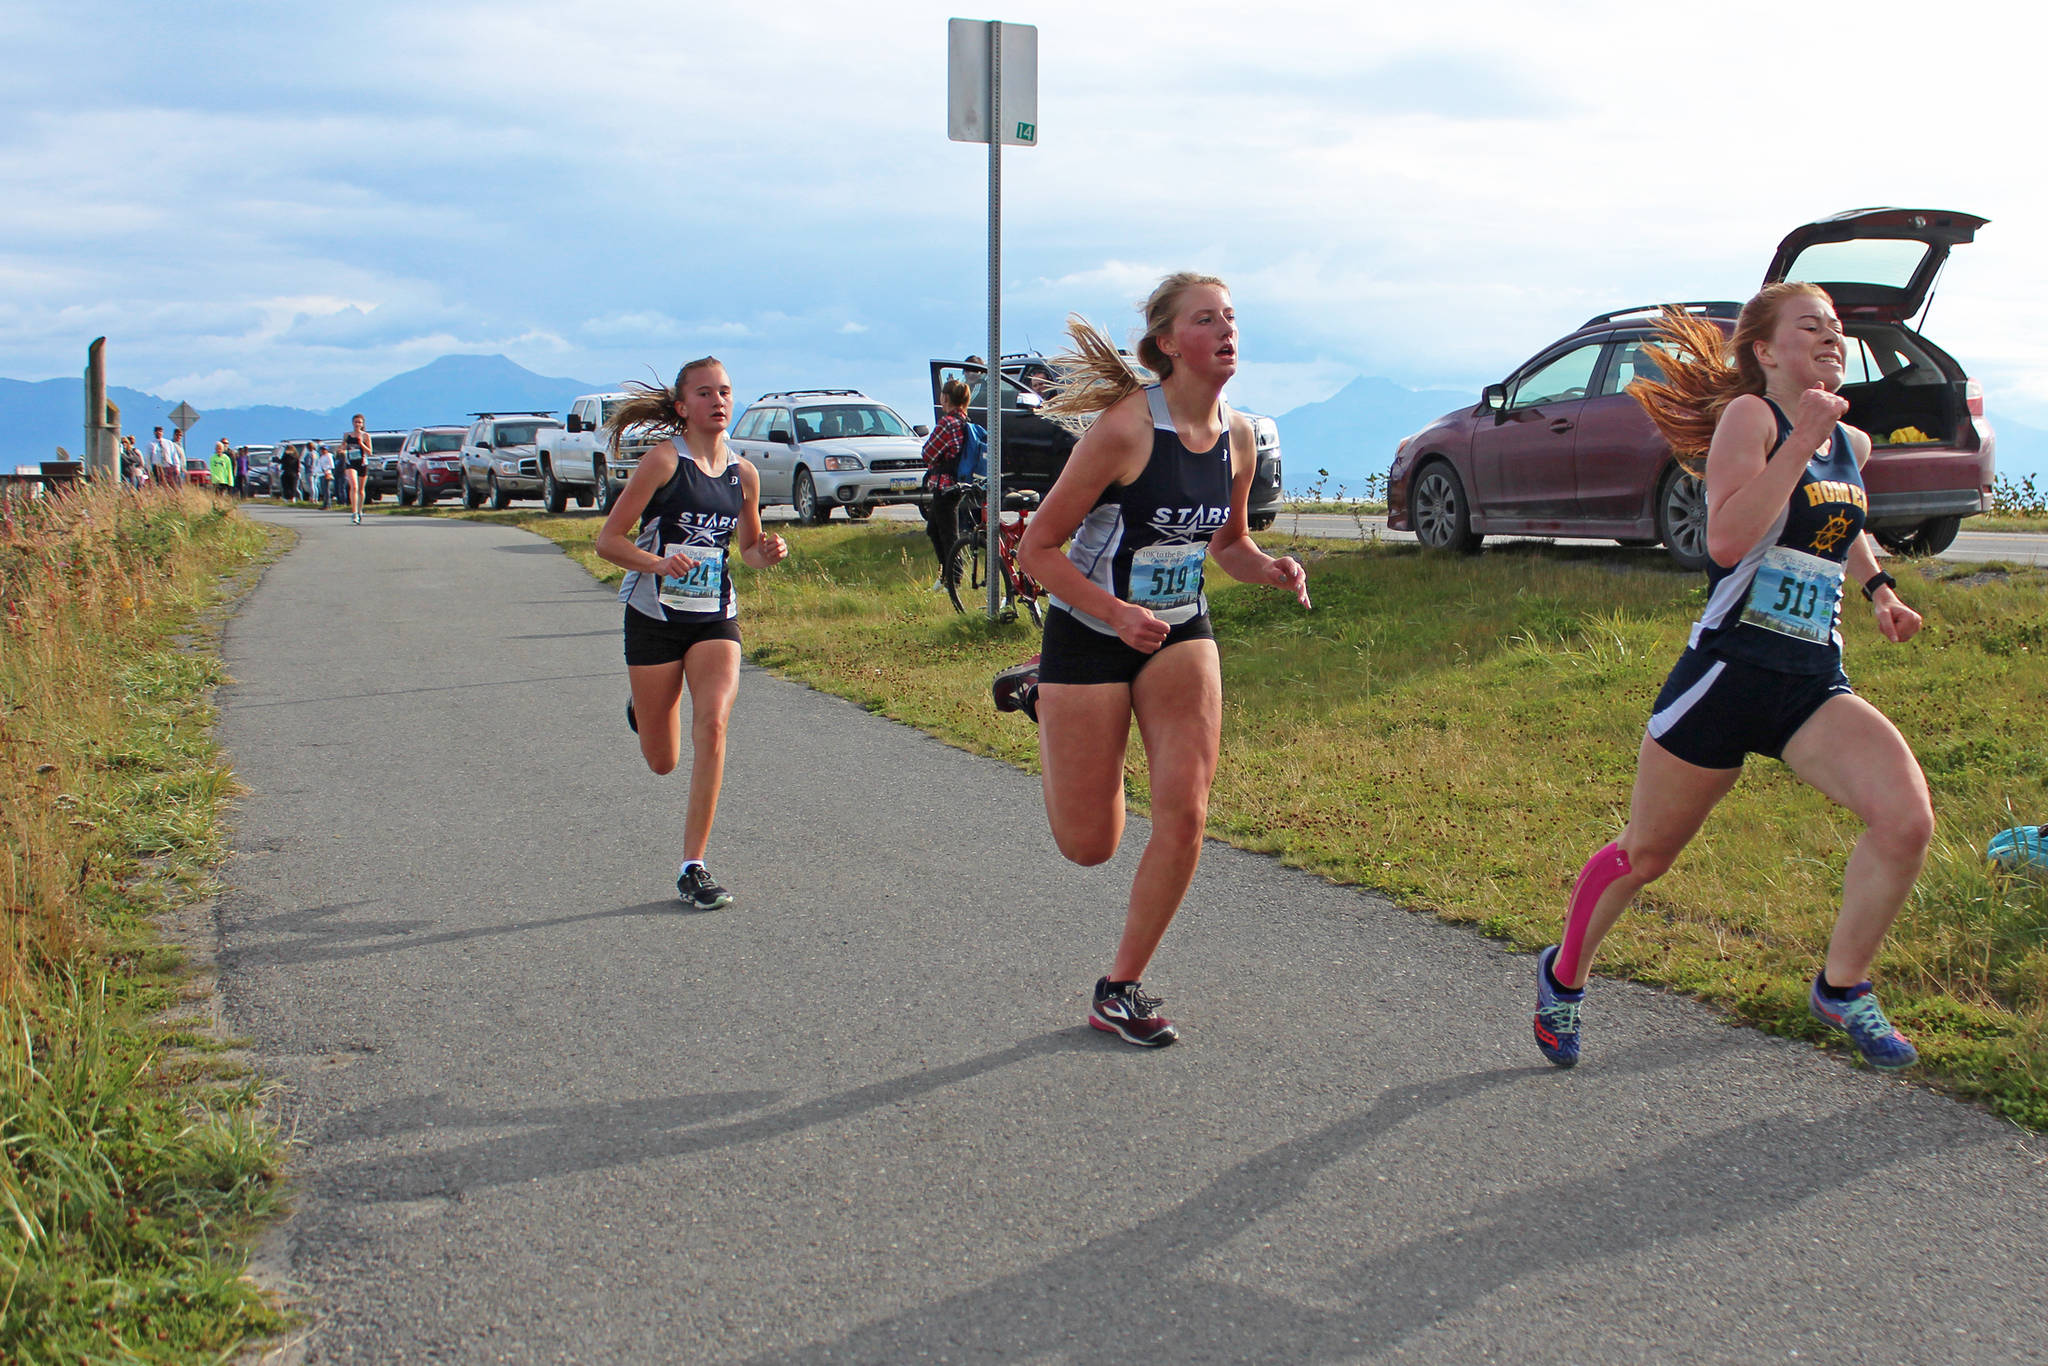 Homer’s Sienna Carey rushes to pass two Soldotna High School cross-country runners at the finish line of the girls 5K race Friday, Sept. 7, 2018 during the Homer Invitational held on the Homer Spit in Homer, Alaska. (Photo by Megan Pacer/Homer News)